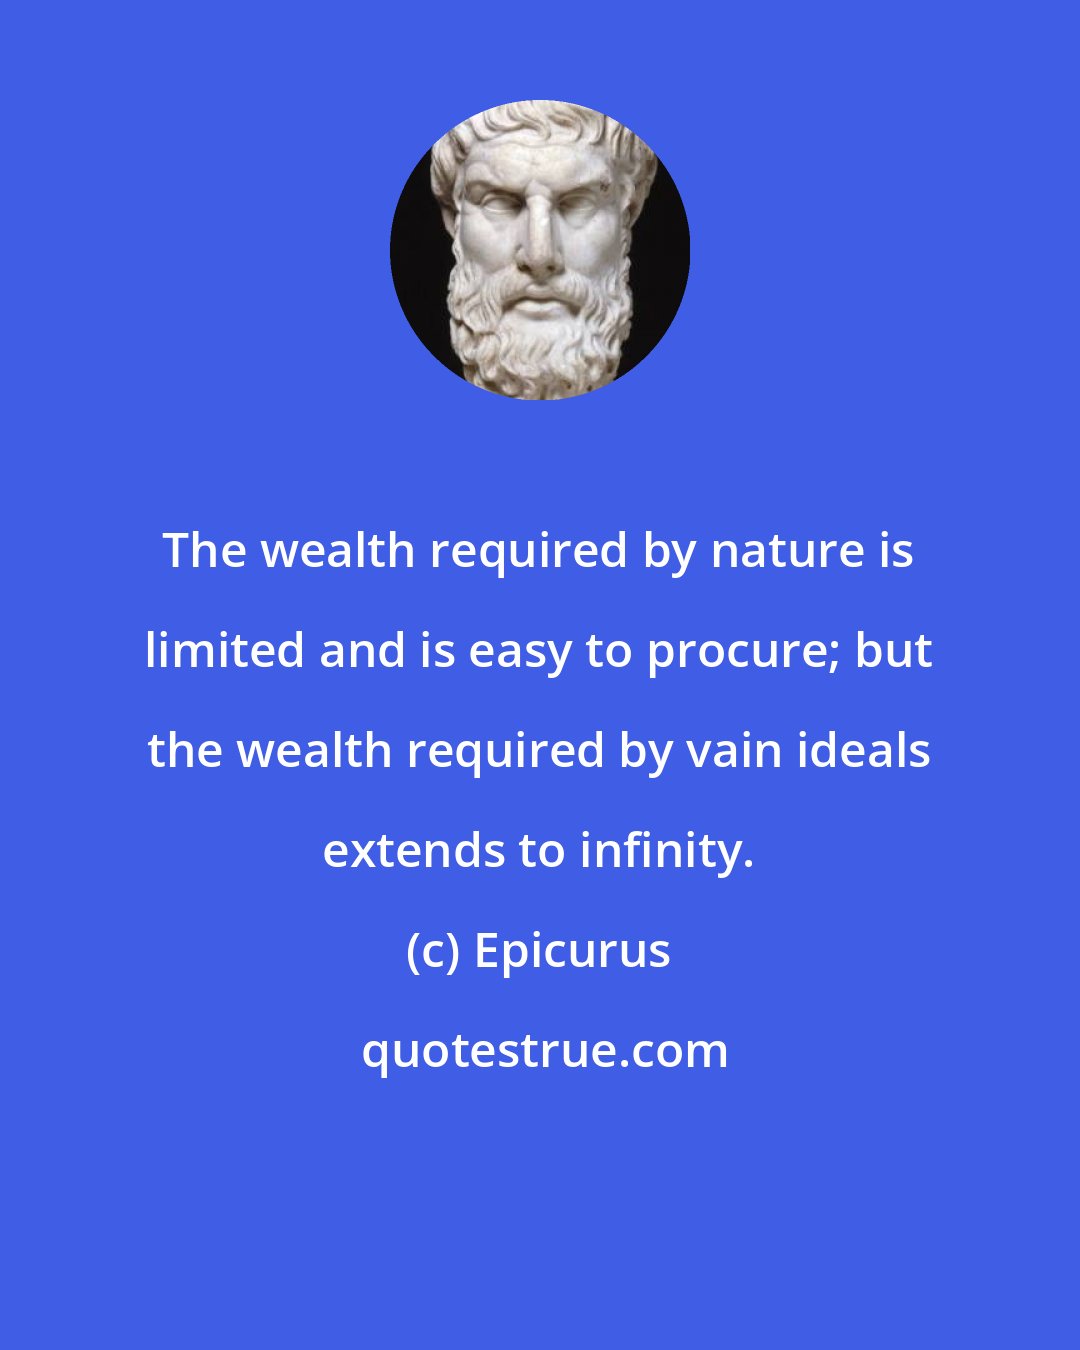 Epicurus: The wealth required by nature is limited and is easy to procure; but the wealth required by vain ideals extends to infinity.